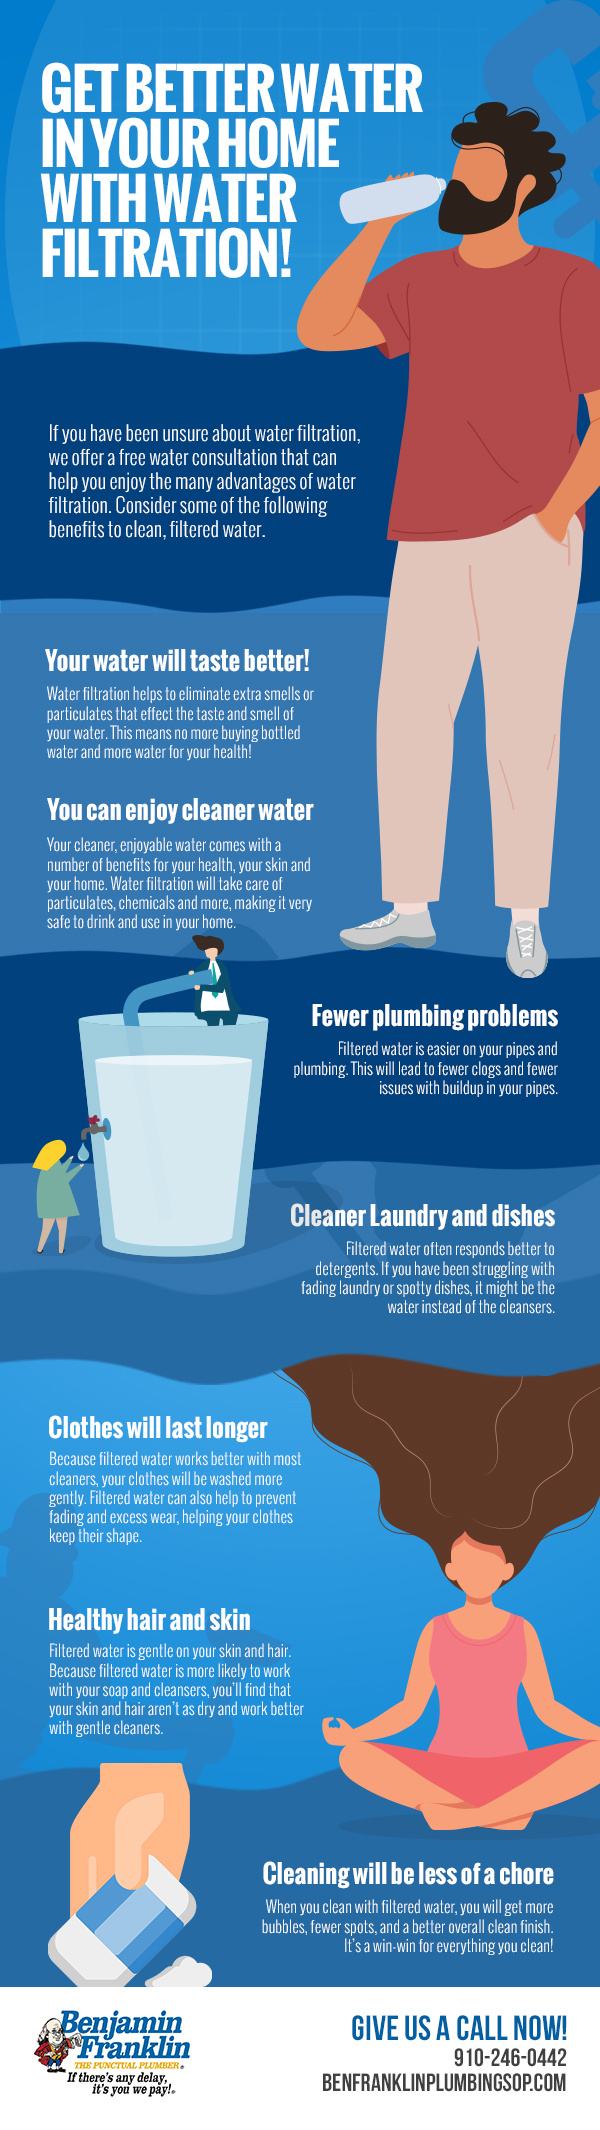 Get Better Water in Your Home with Water Filtration! [infographic]